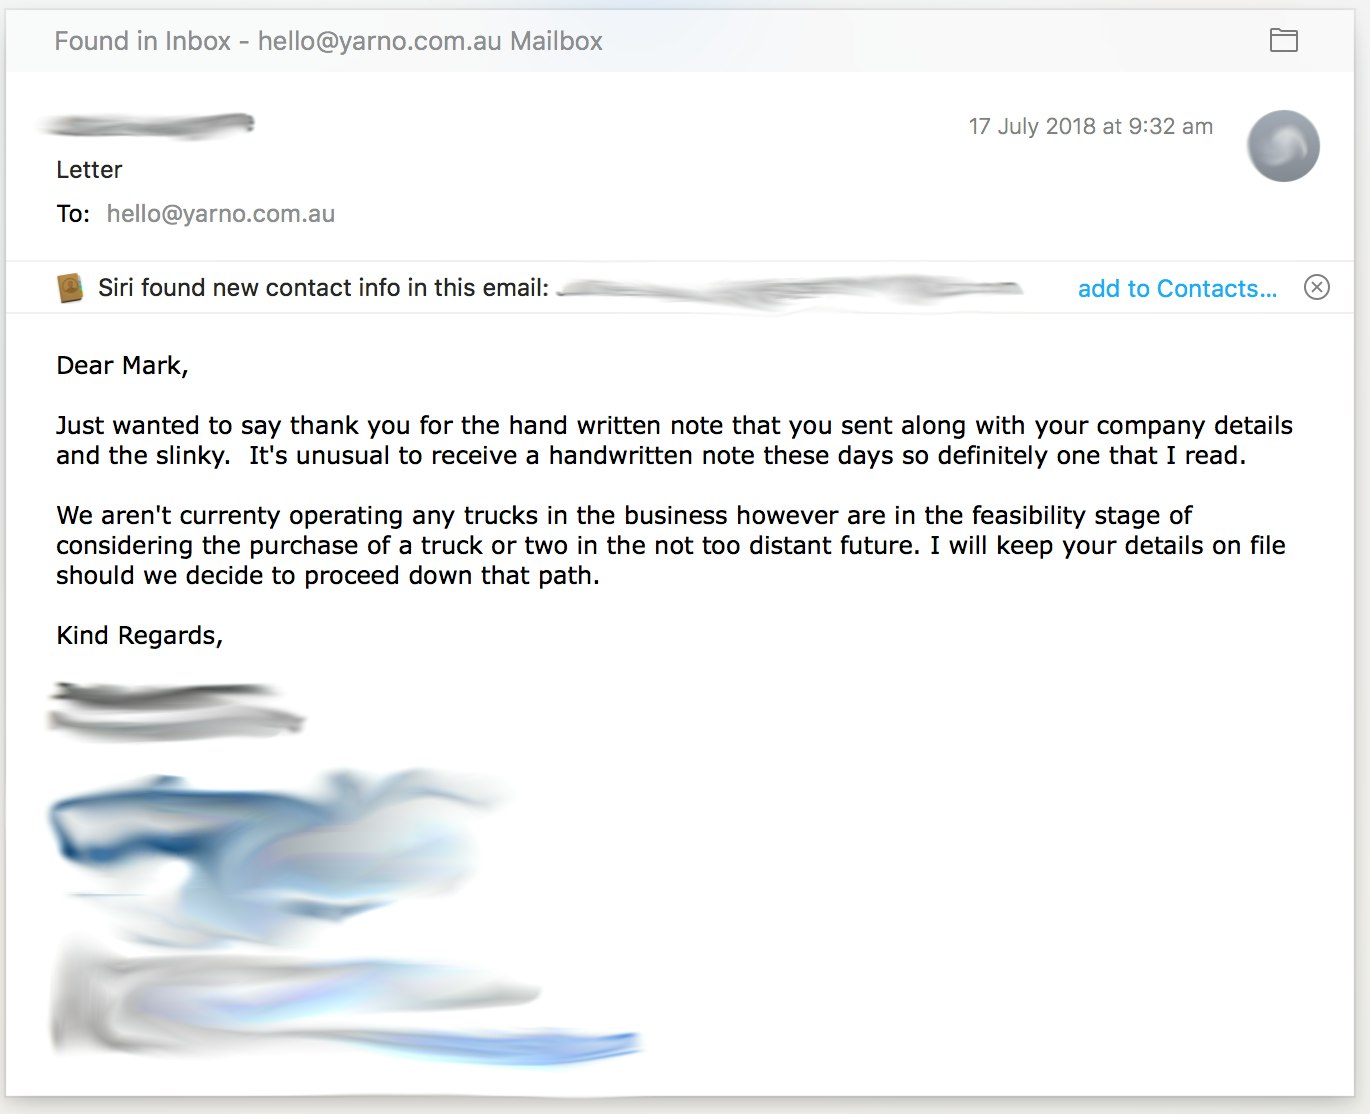 Email to Yarno with personal details rubbed out